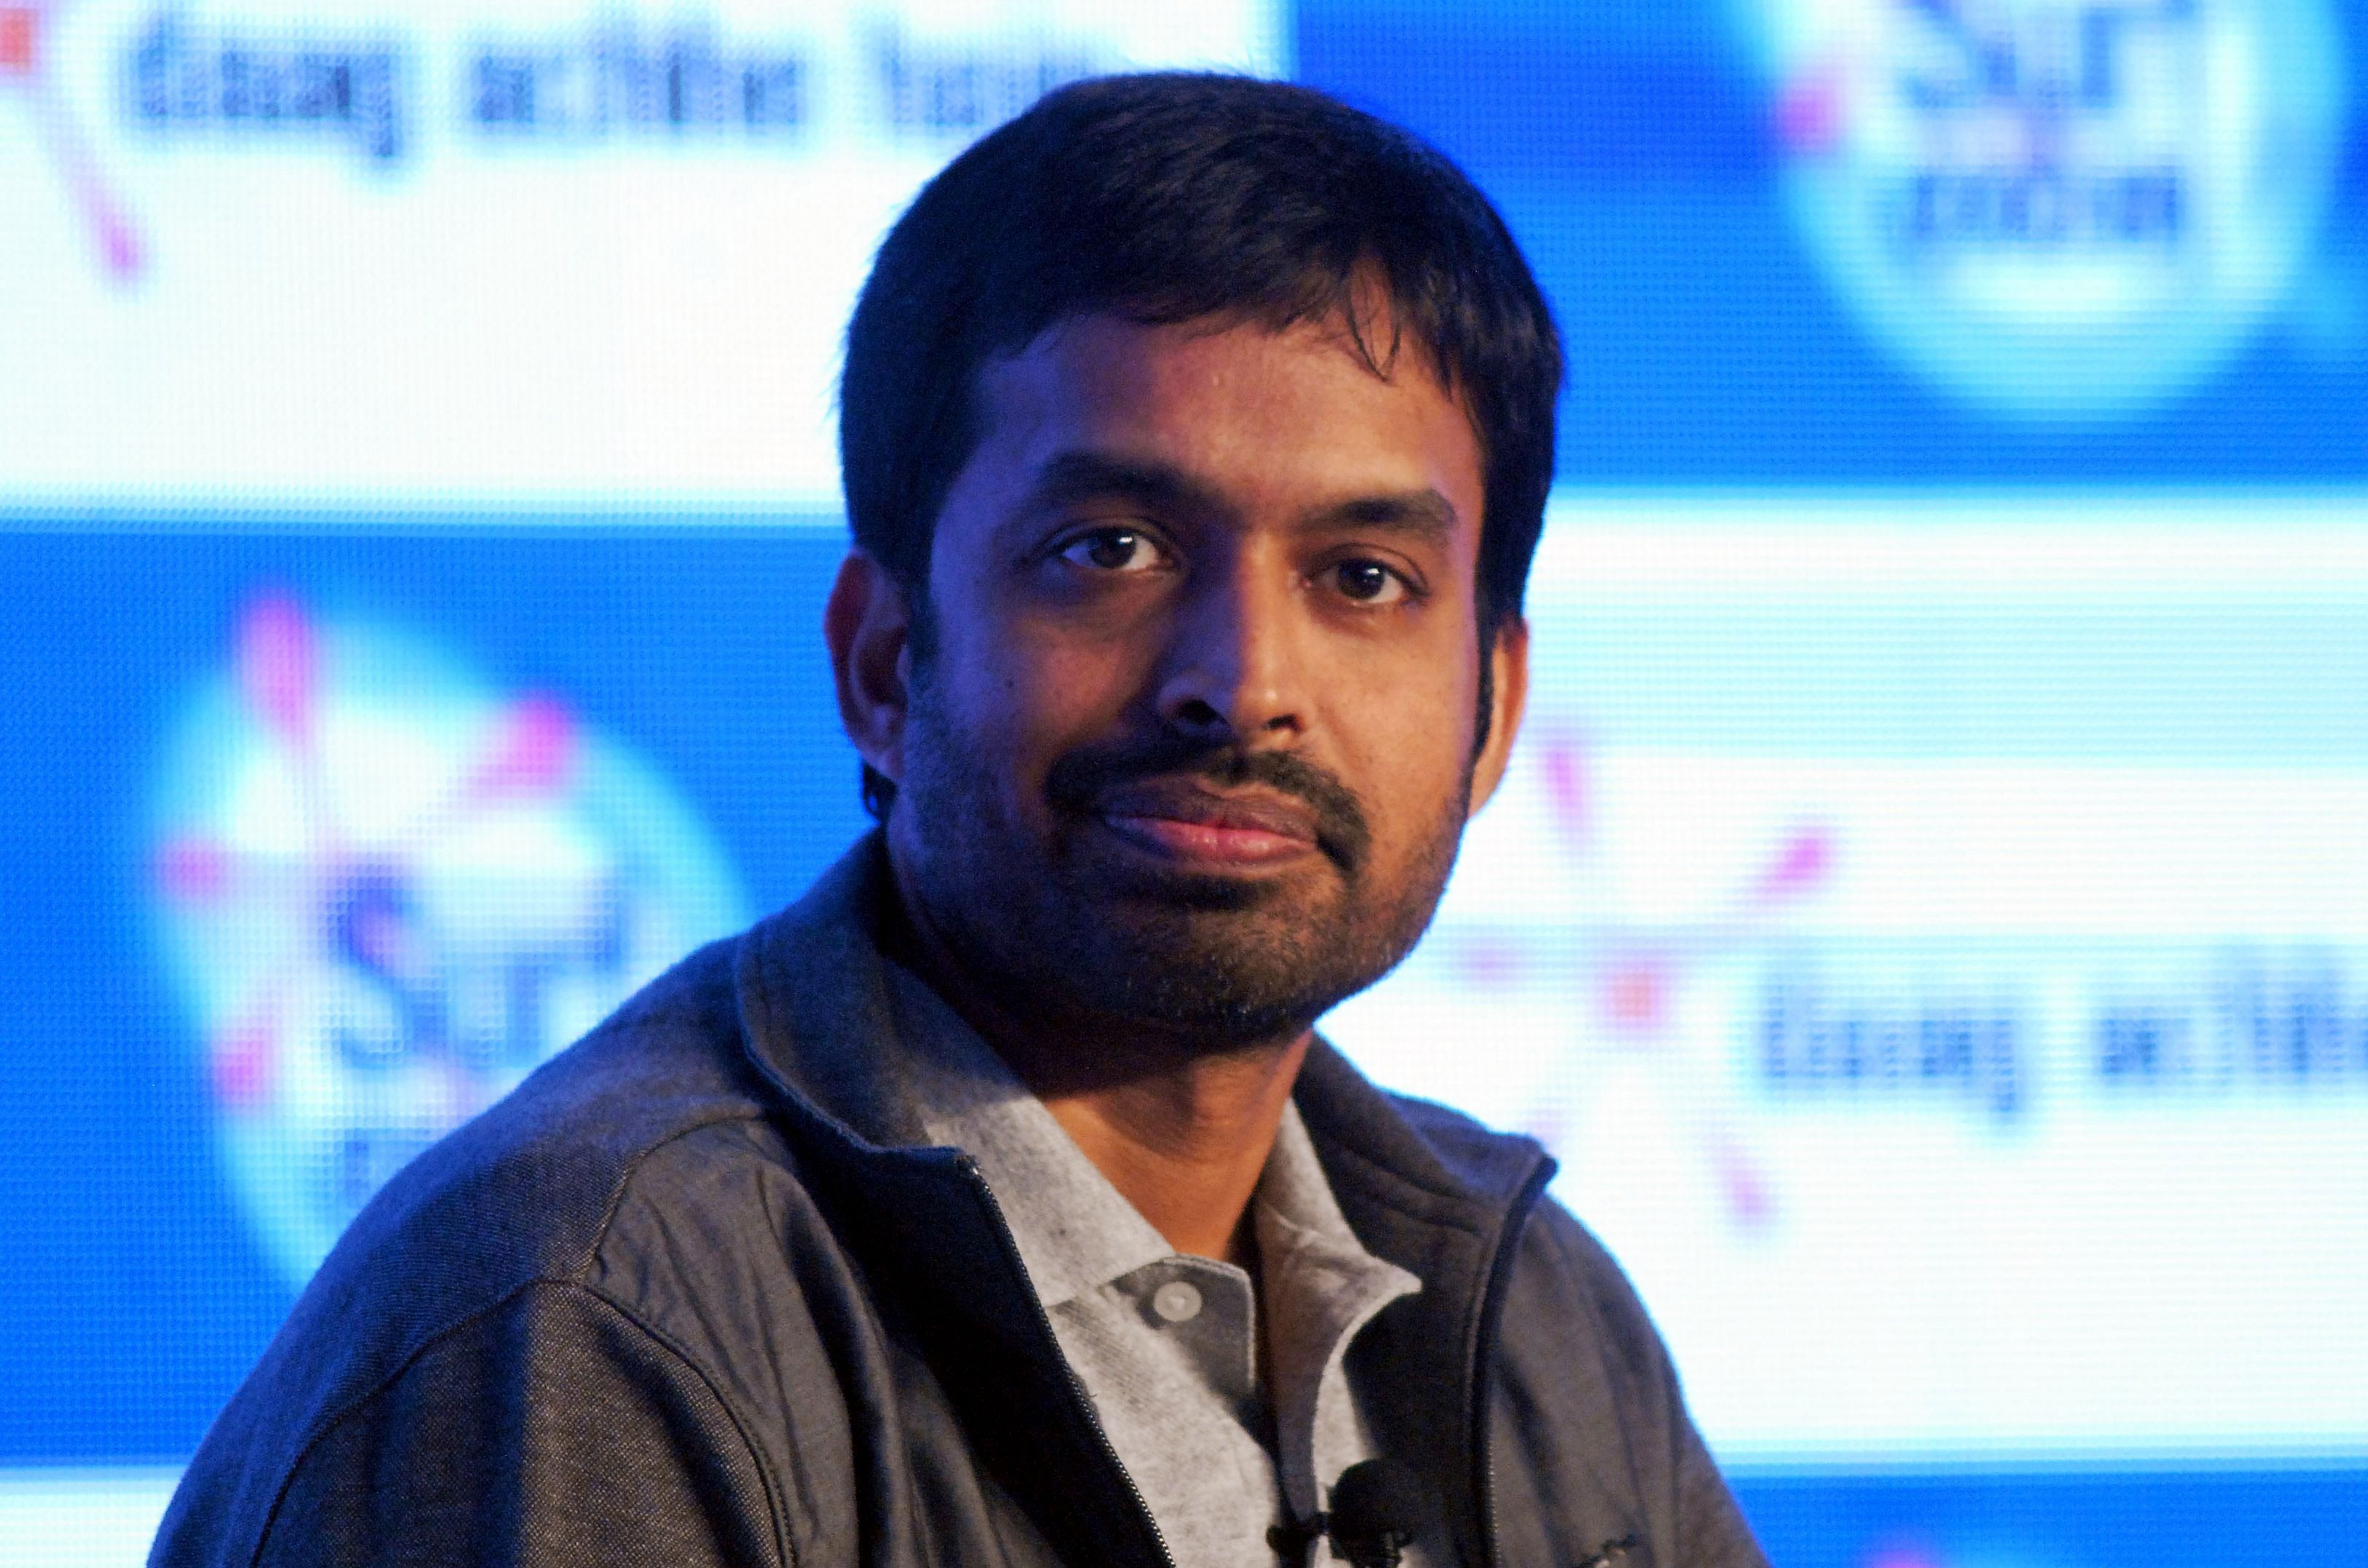 Former Indian badminton player Gopichand Pullela looks on during a panel discussion for the Surf Excel campaign launch in Mumbai. (AFP Photo)